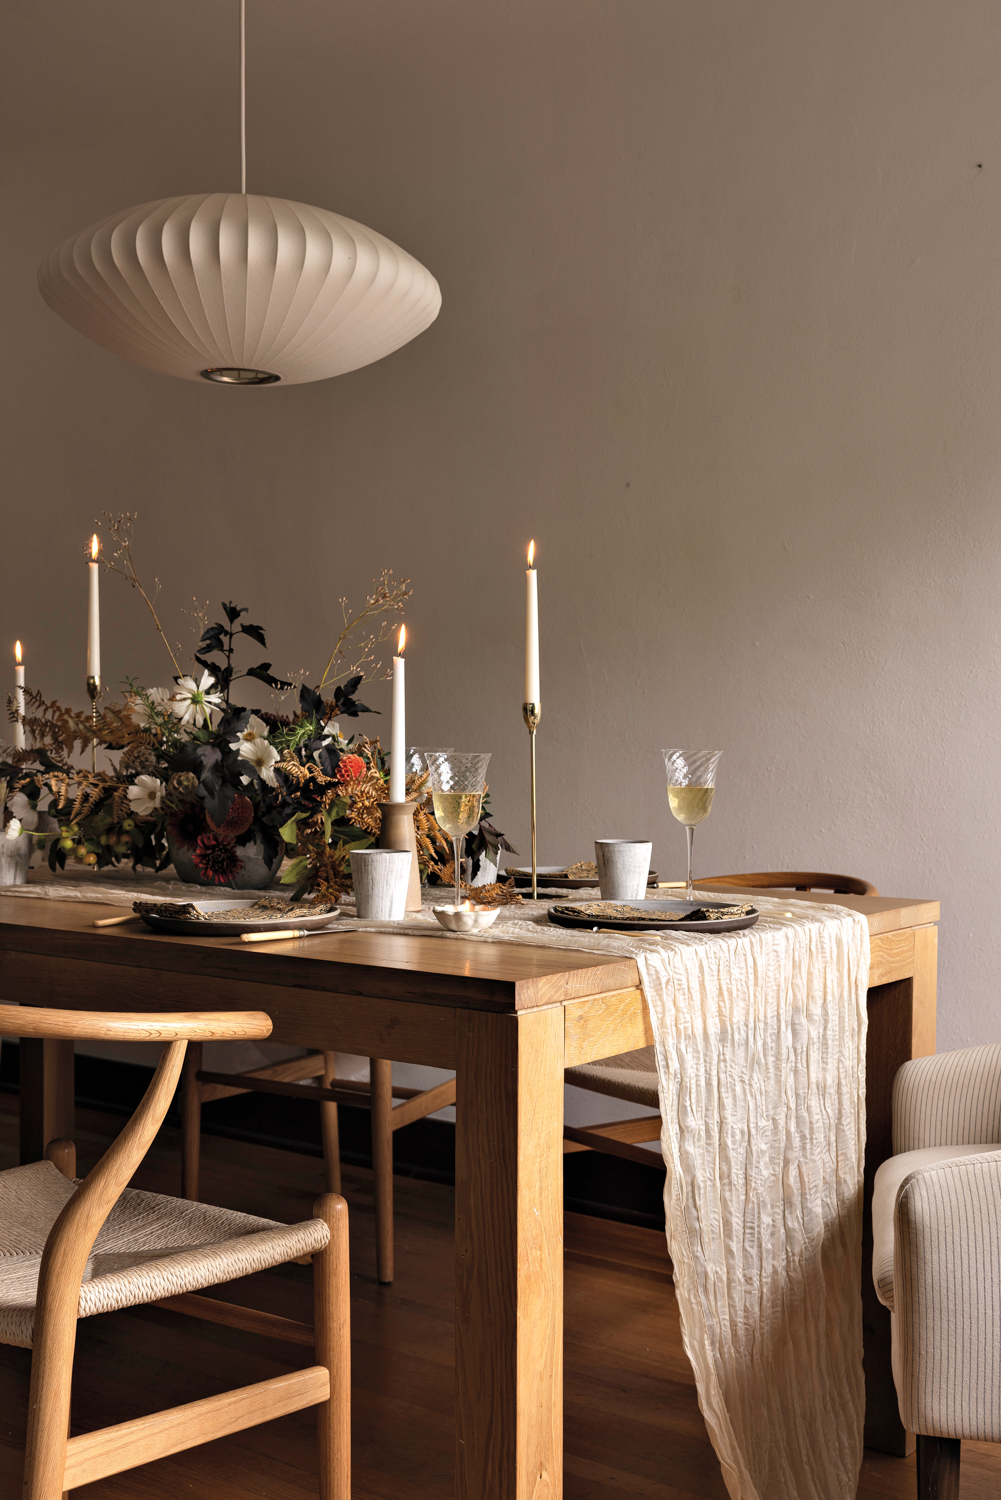 Wood dining table set with a light-colored cloth runner, candlesticks and a floral arrangement by Chloe Deane